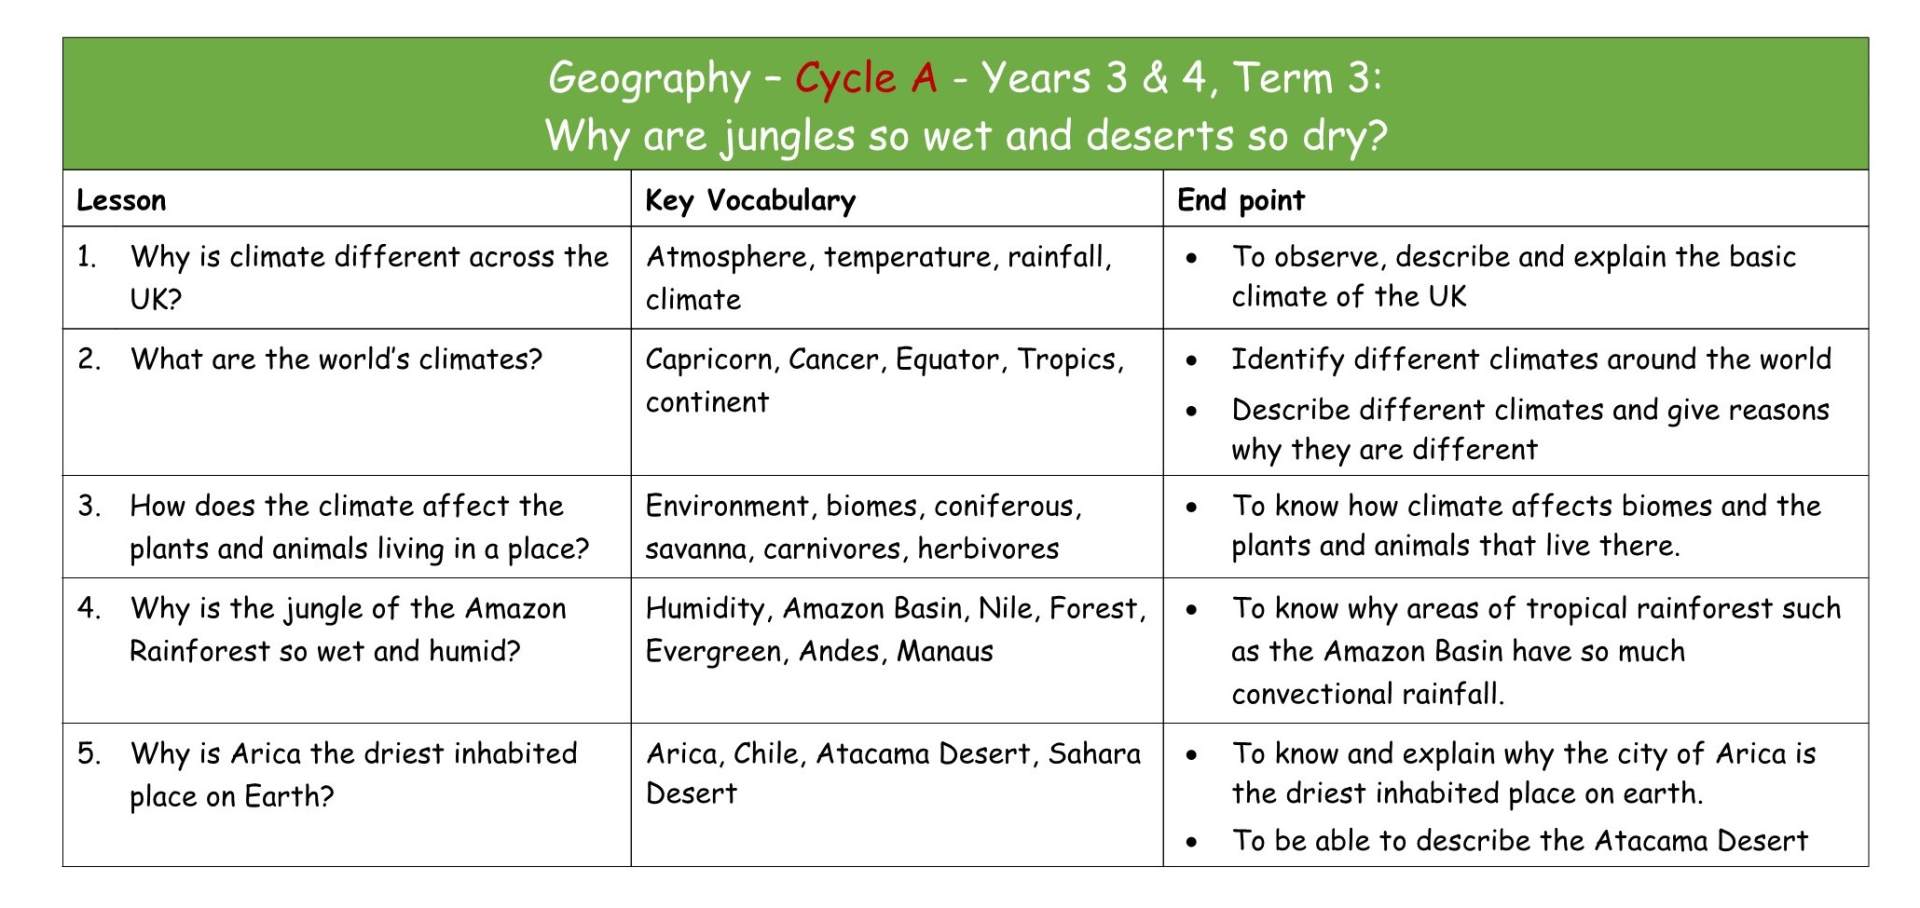 Geography Y3&4 Cycle A MTP T3